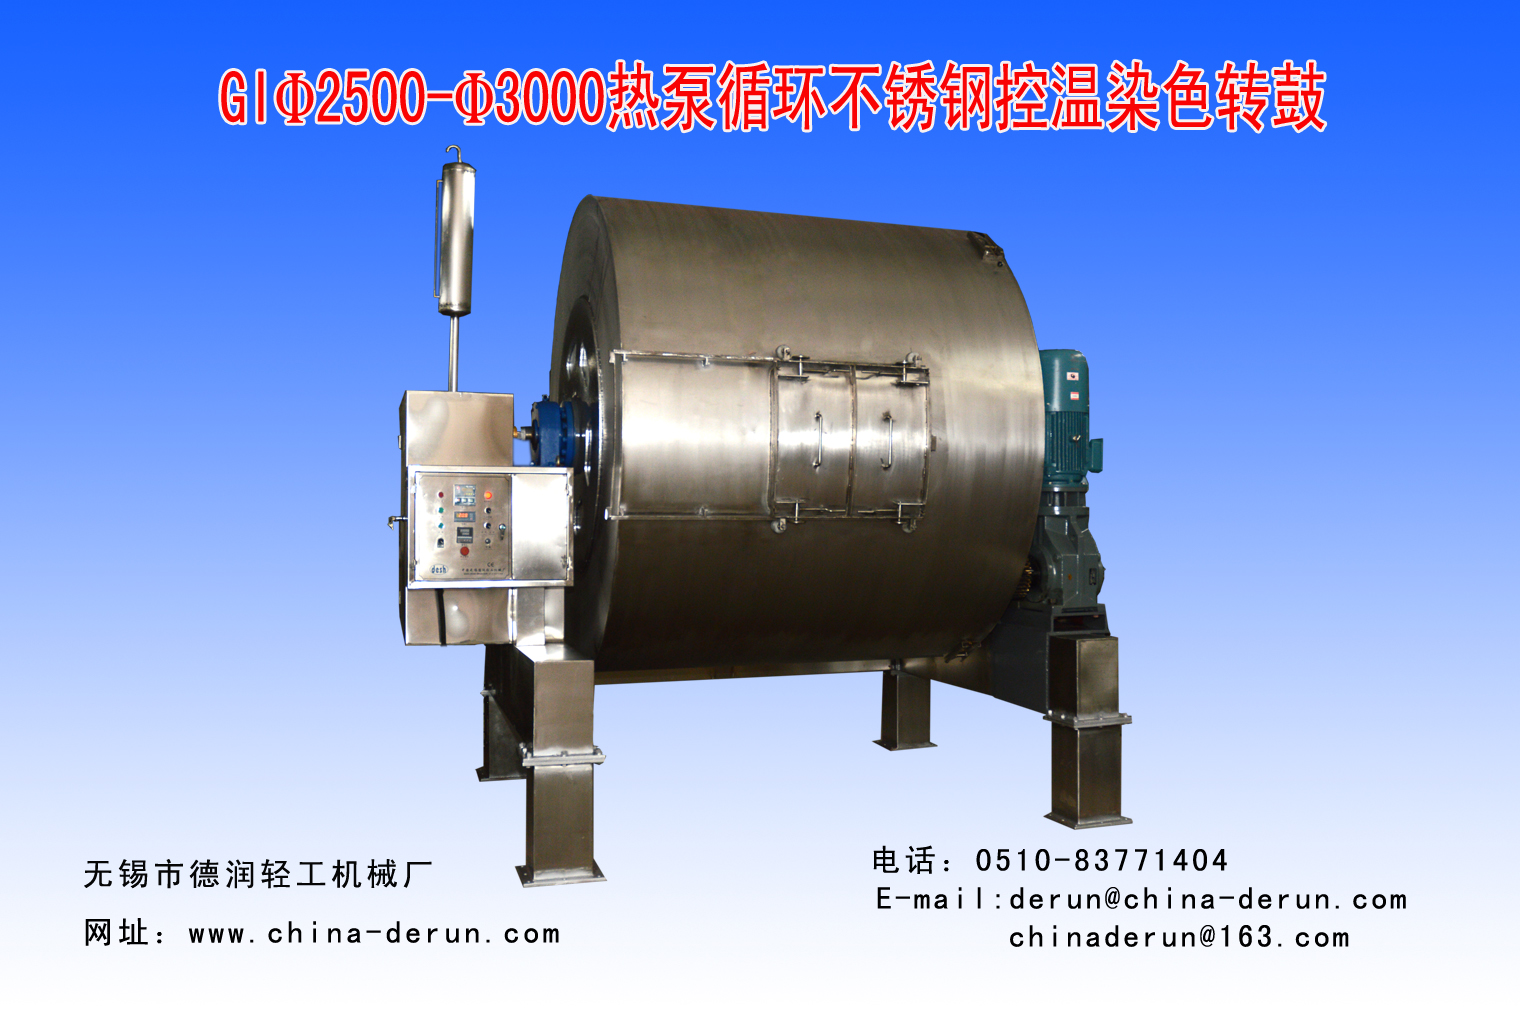 GI2500-3000 Stainless steel temperature control dyeing drum